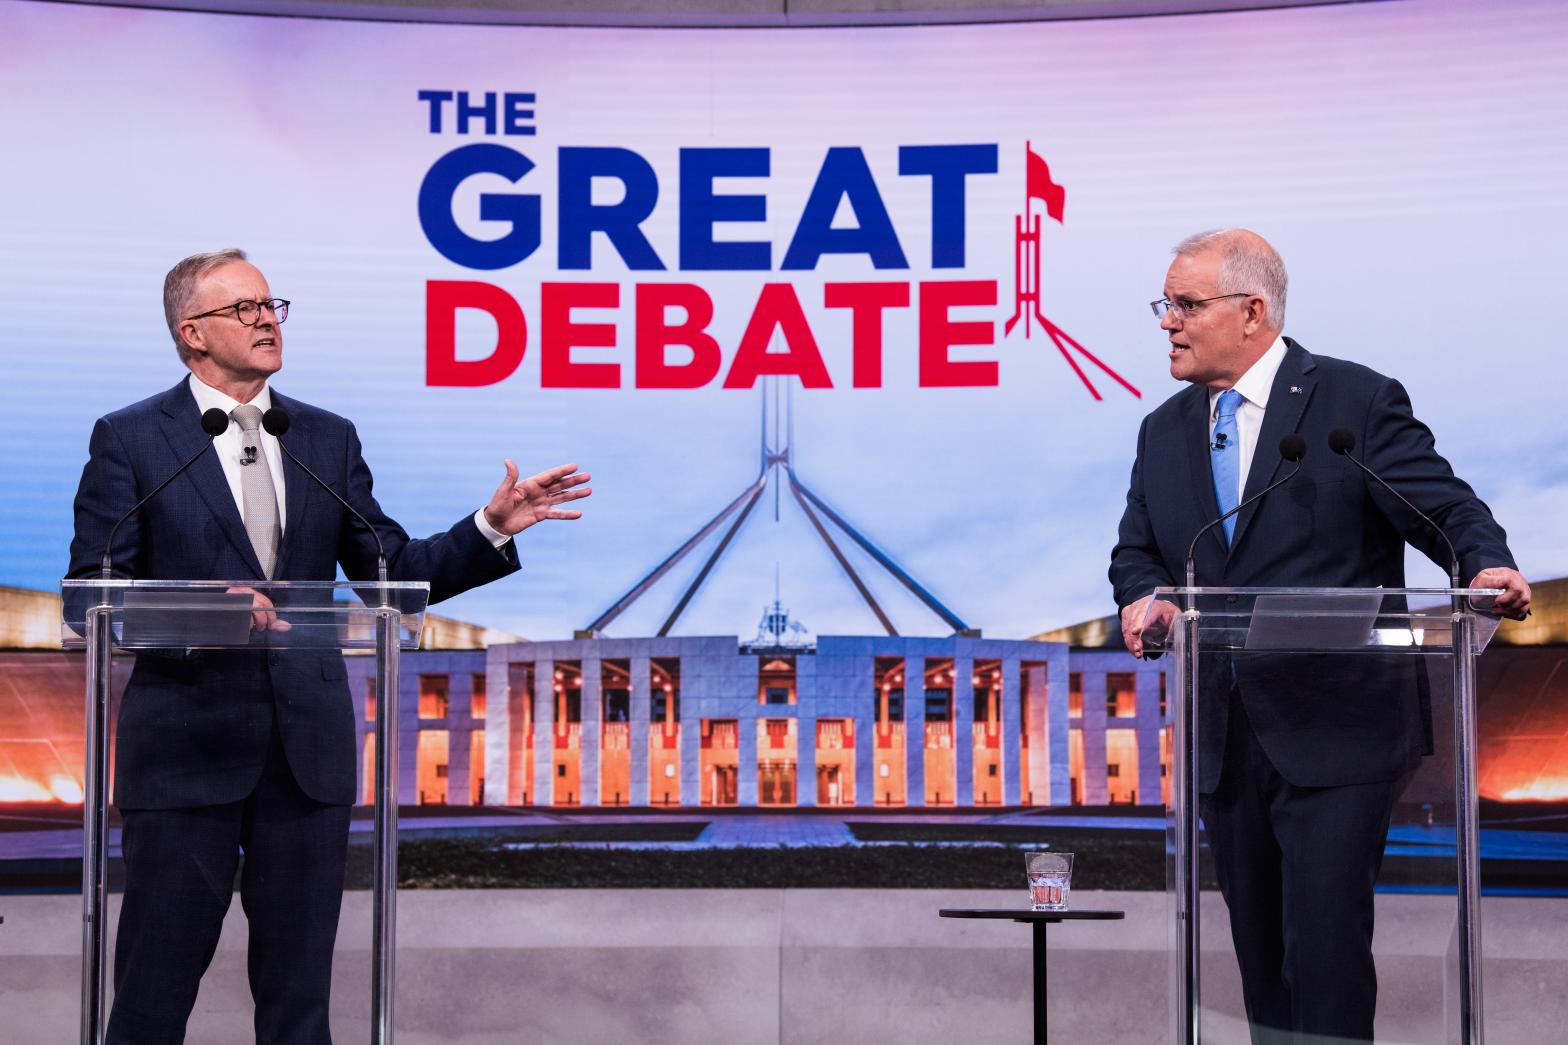 Scott Morrison And Anthony Albanese Take Part In Second Leaders' Debate Ahead Of Federal Election